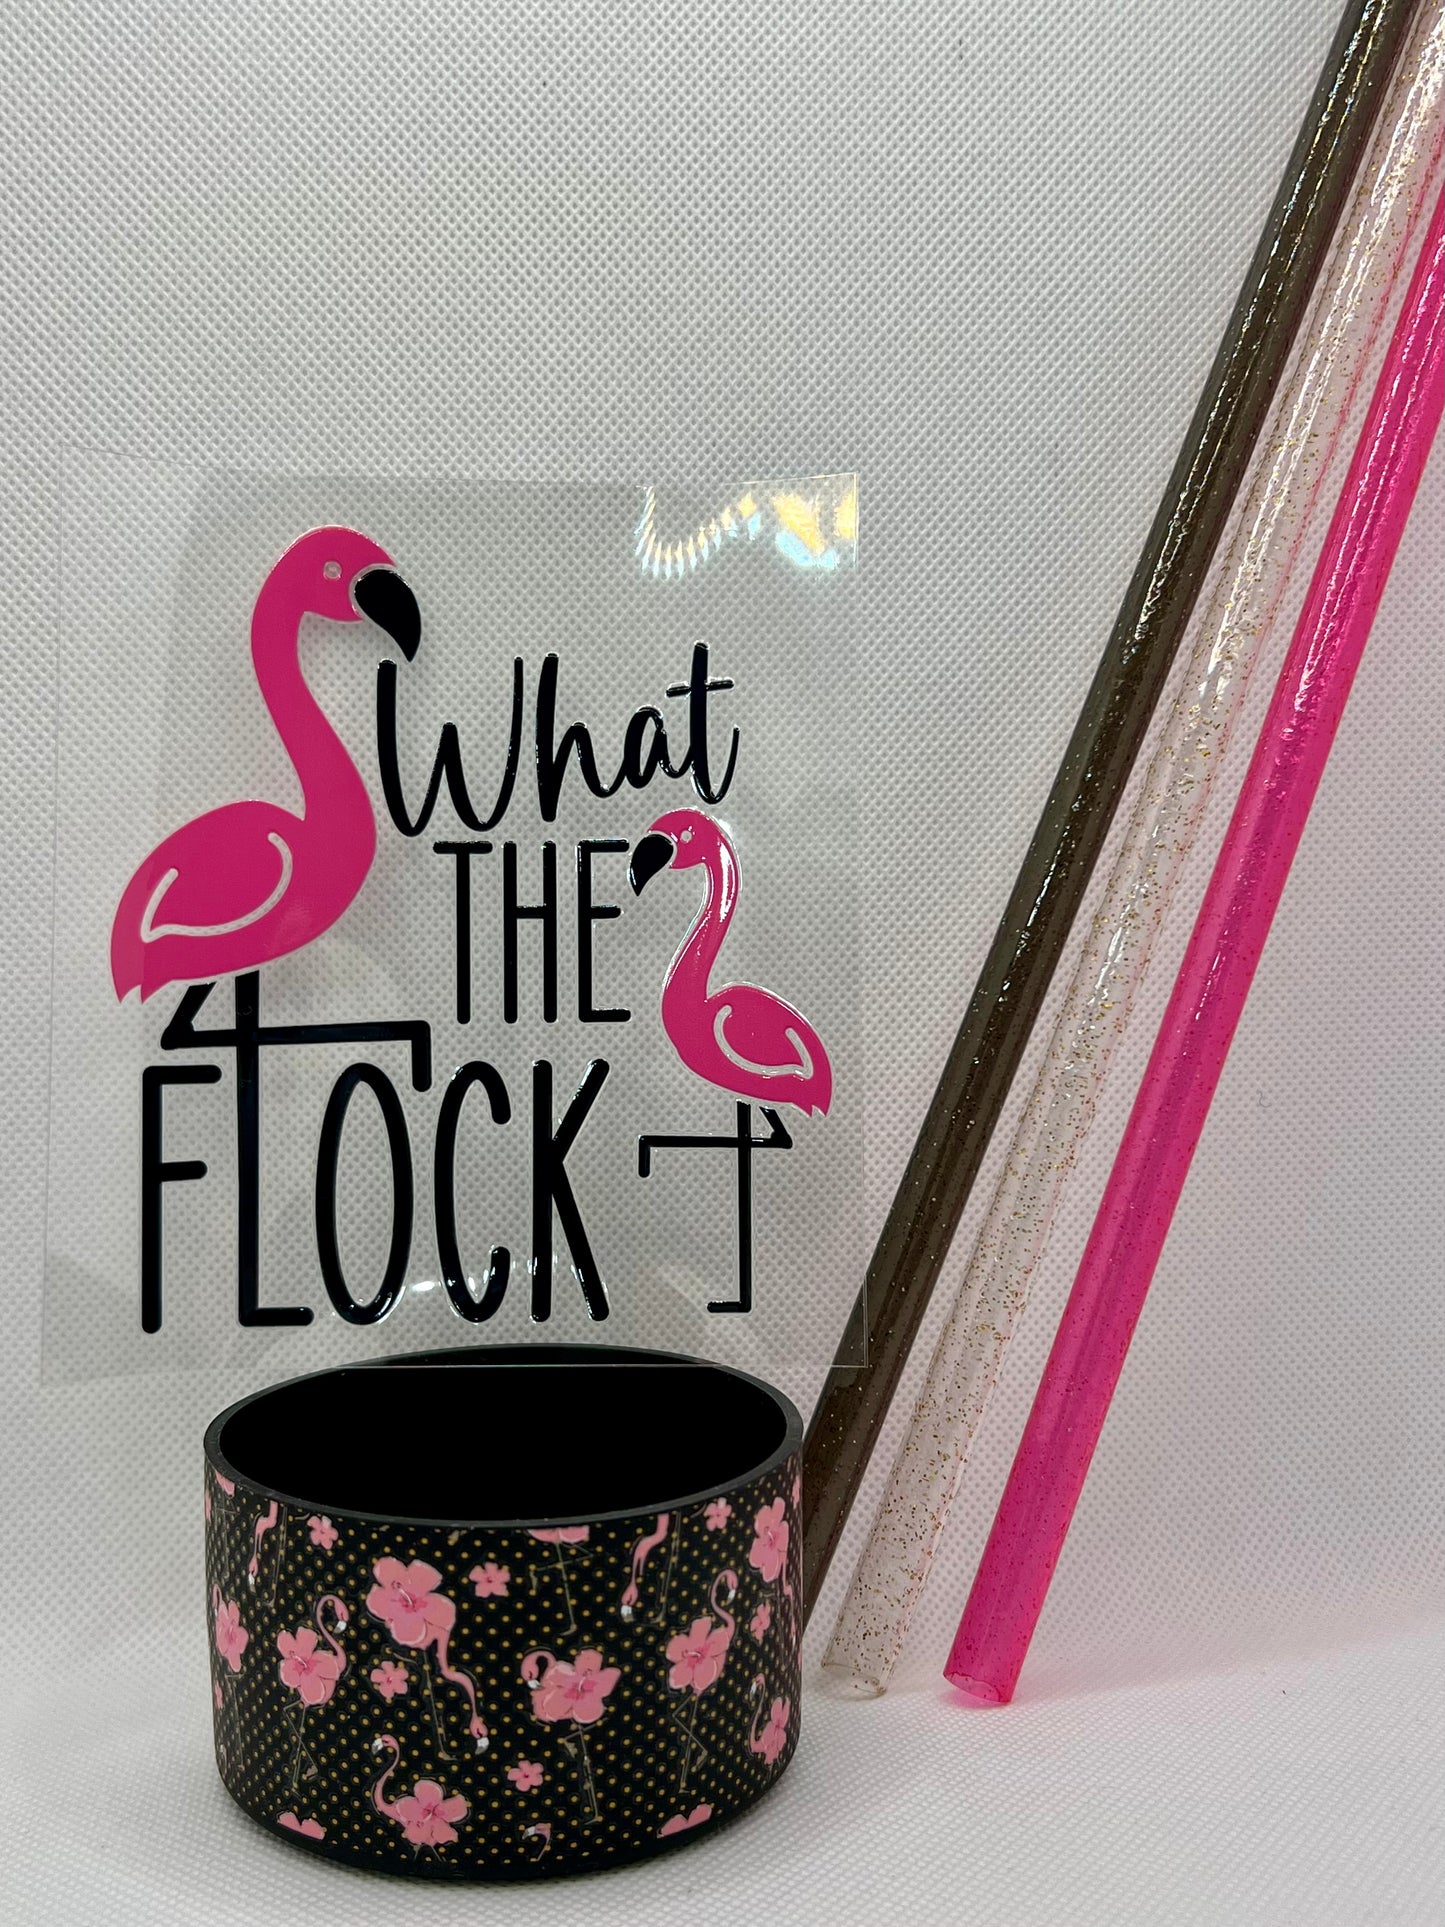 *DEAL OF THE WEEK* The Flock